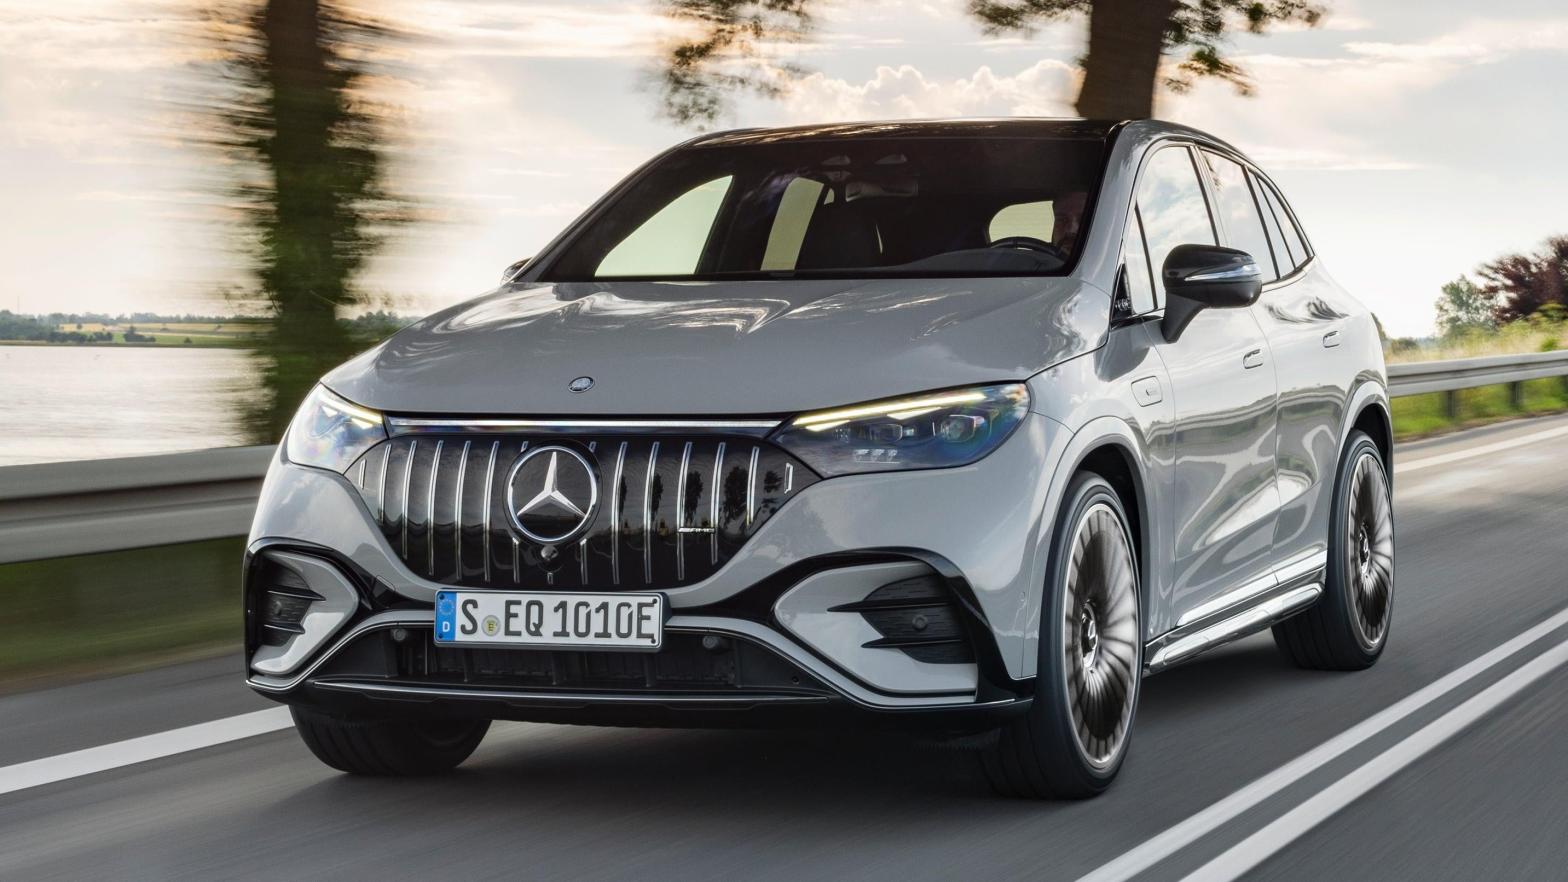 The Mercedes-Amg EQE SUV Still Isn’t Fast Enough to Outrun Its Polarising Styling